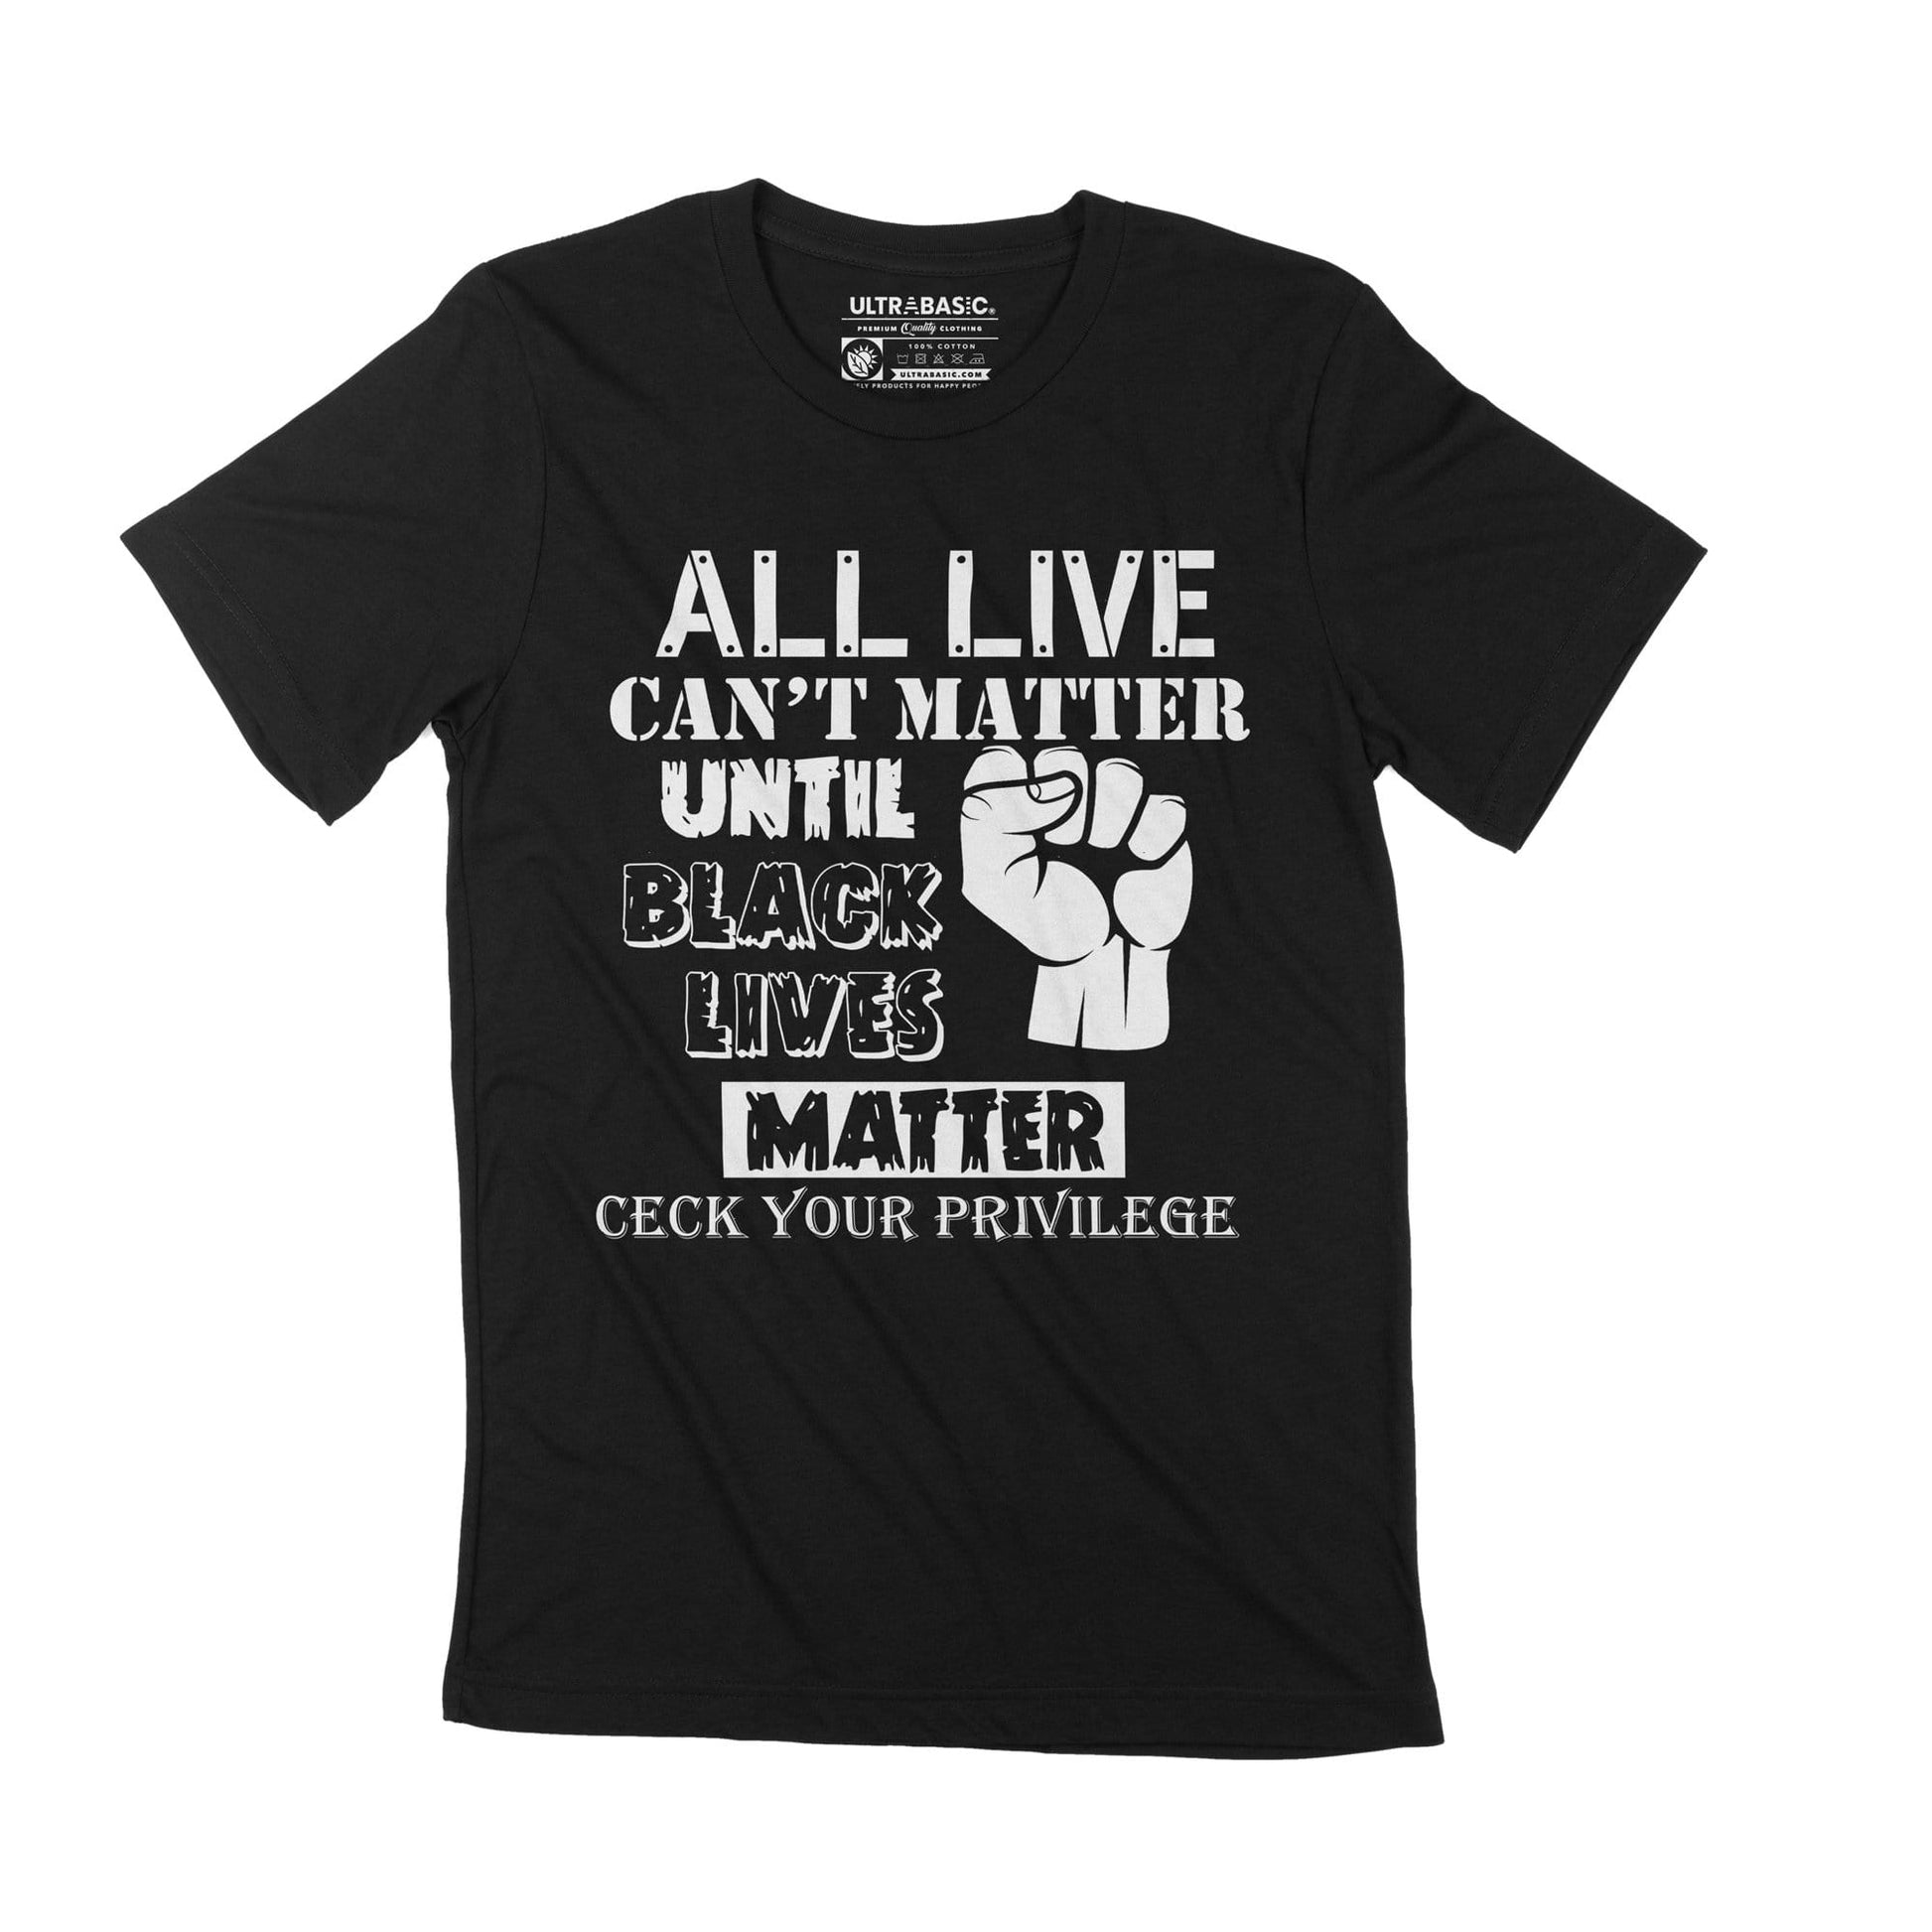 i cant breathe tshirt george floyd revolution blm movement political protest love no hate tees police brutality support kindness respect us equal rights freedom equality empowerment no racism anti racist silence violence solidarity first